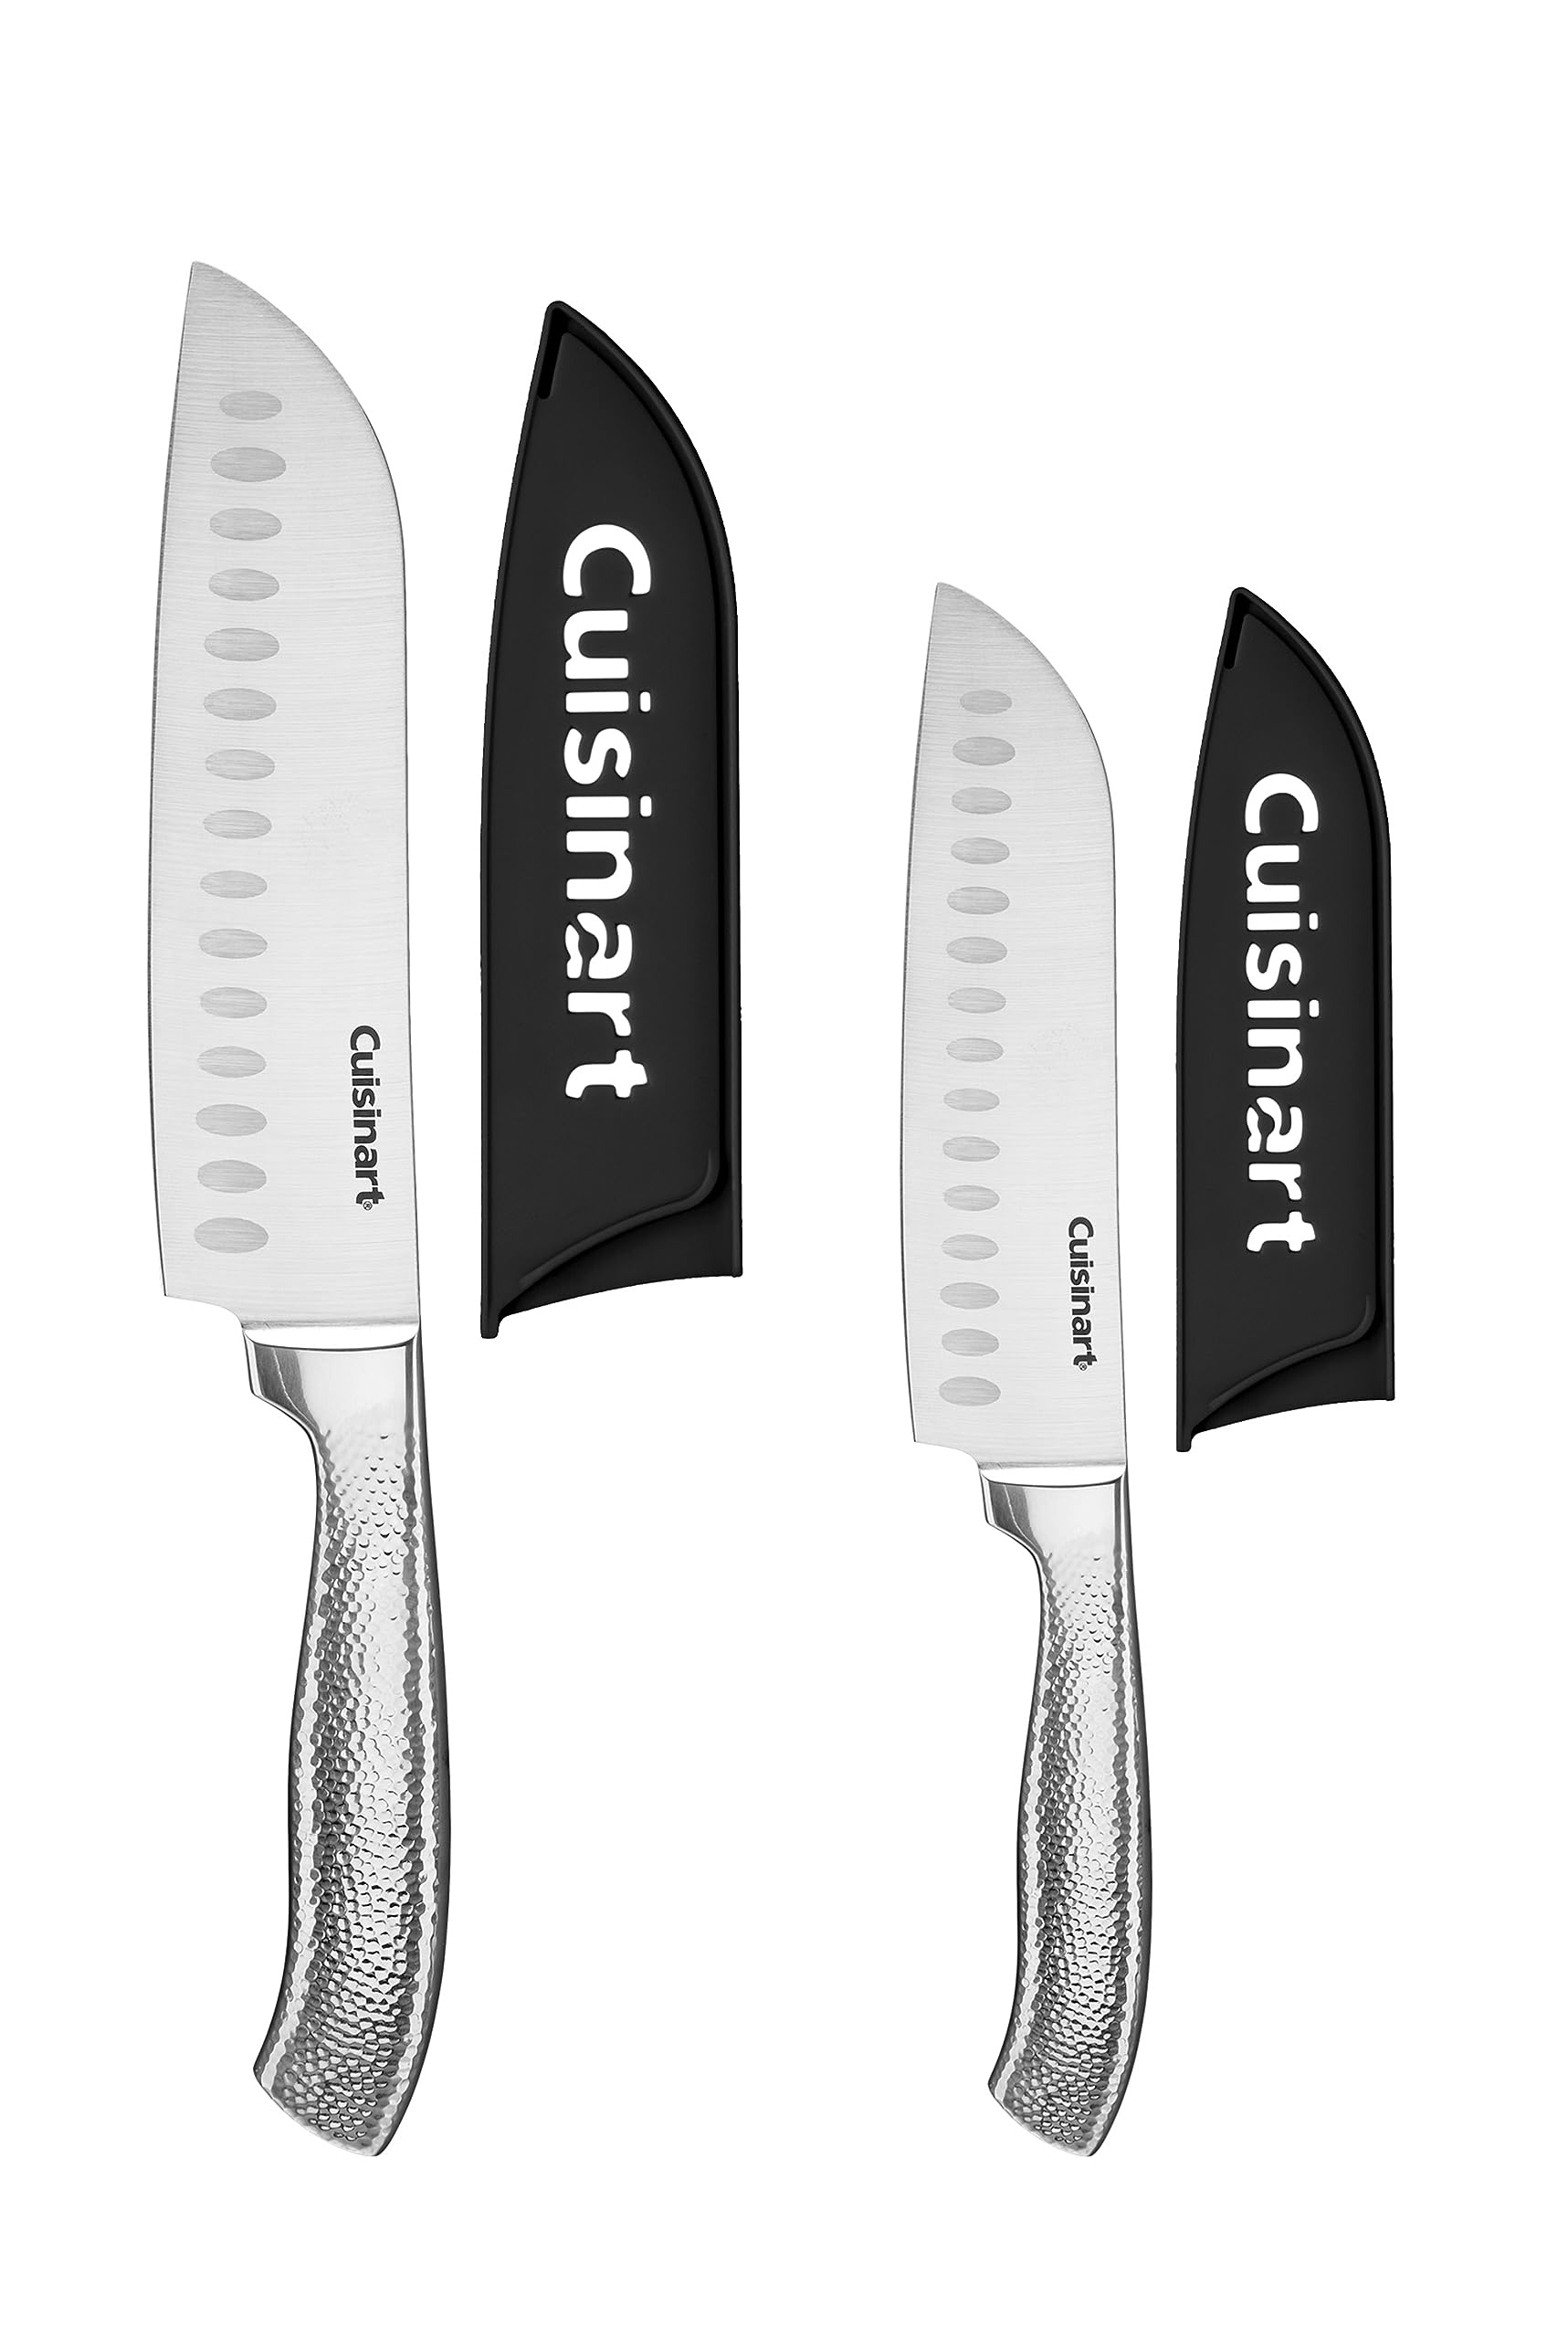 Cuisinart Classic High-Carbon Hammered Stainless Steel Forged Knife Set With Sheath Blade Gaurds (4-Piece Set) 7-Inch Santoku and 5-Inch Santoku